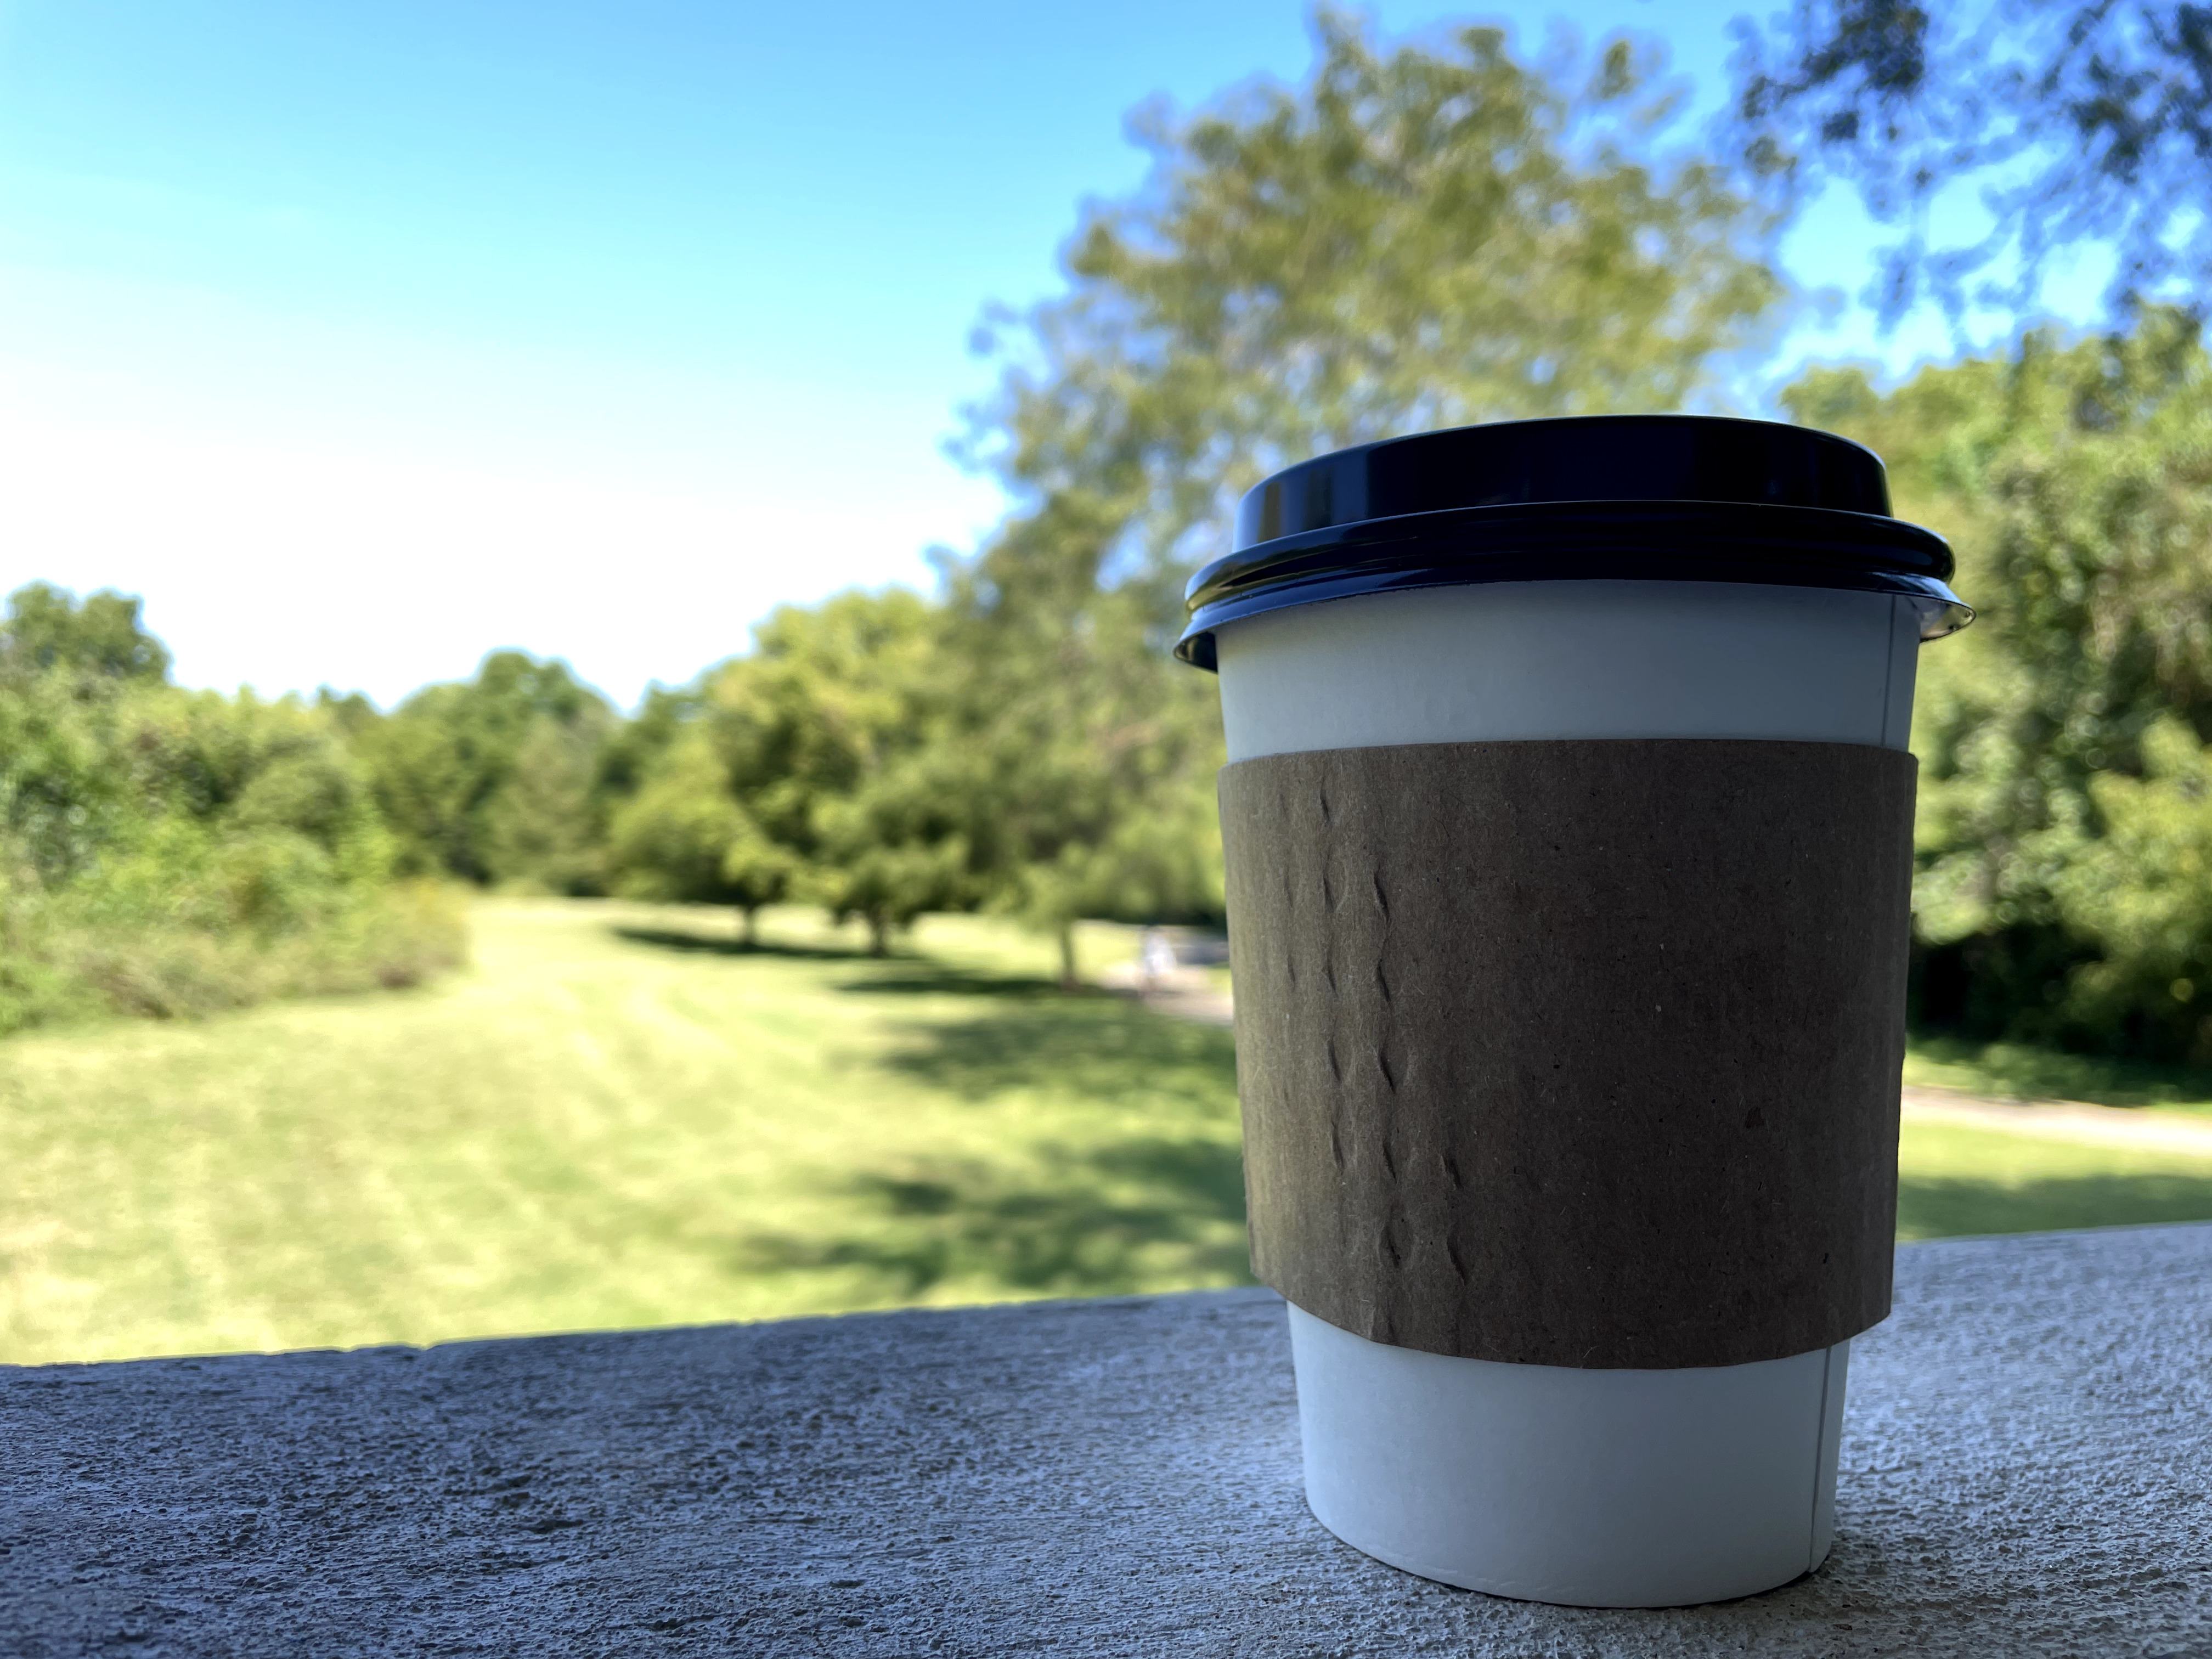 Coffee on the back patio of Kingdom Coffee on Lone Pine Avenue, which overlooks a grassy area along the Lone Pine Trail.